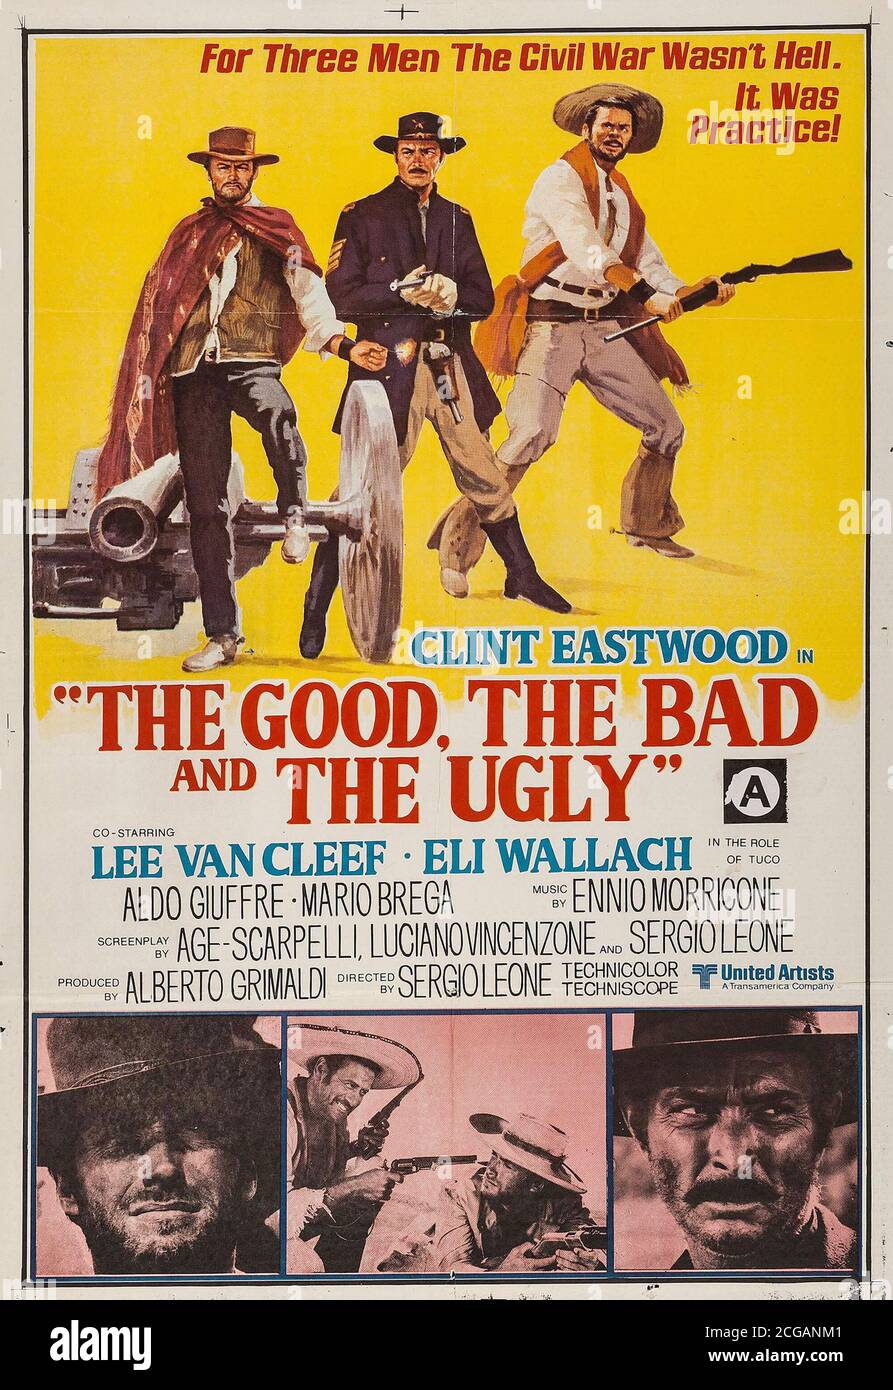 https://c8.alamy.com/comp/2CGANM1/poster-the-good-the-bad-and-the-ugly-1966-united-artists-file-reference-34000-399tha-2CGANM1.jpg